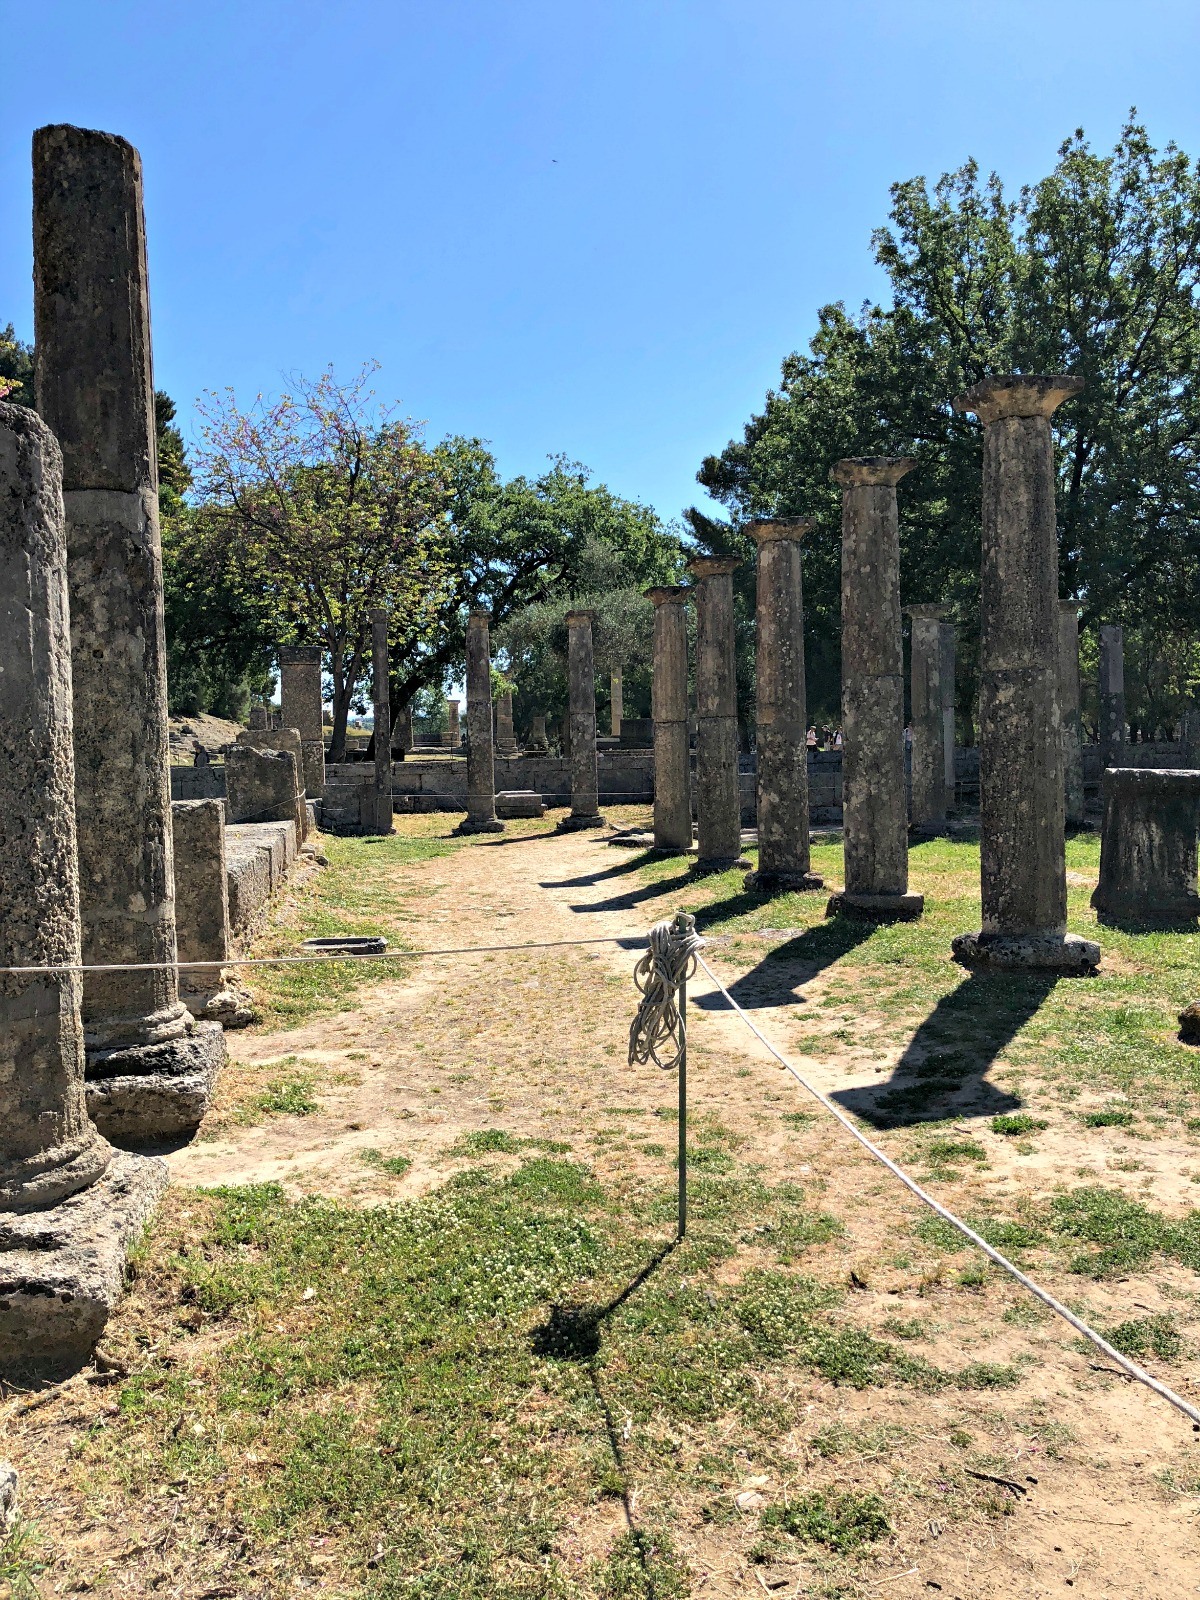 Rows of Columns